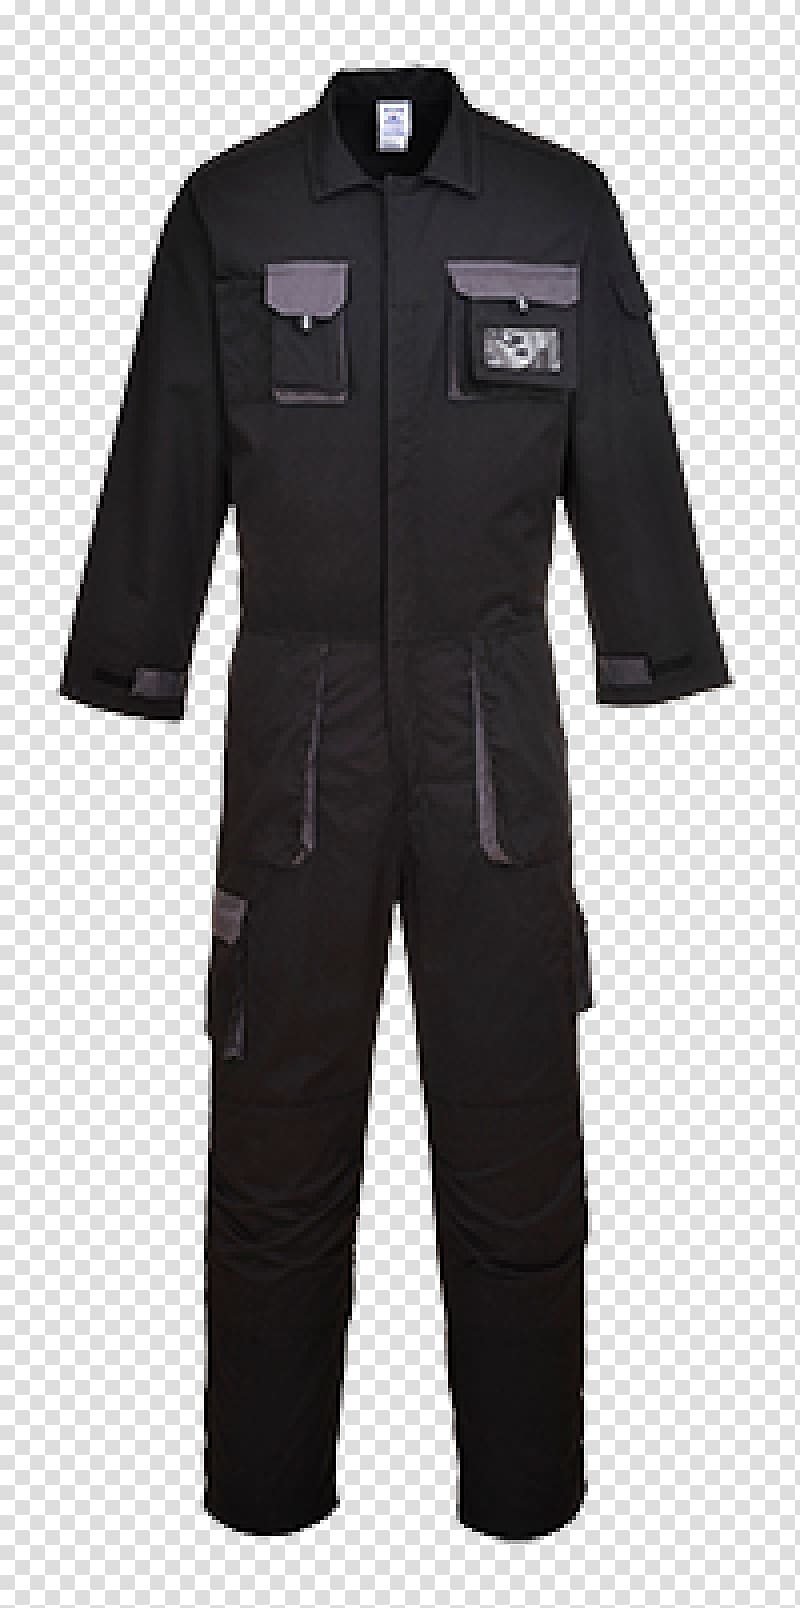 Workwear Boilersuit Overall Clothing Portwest, suit transparent background PNG clipart